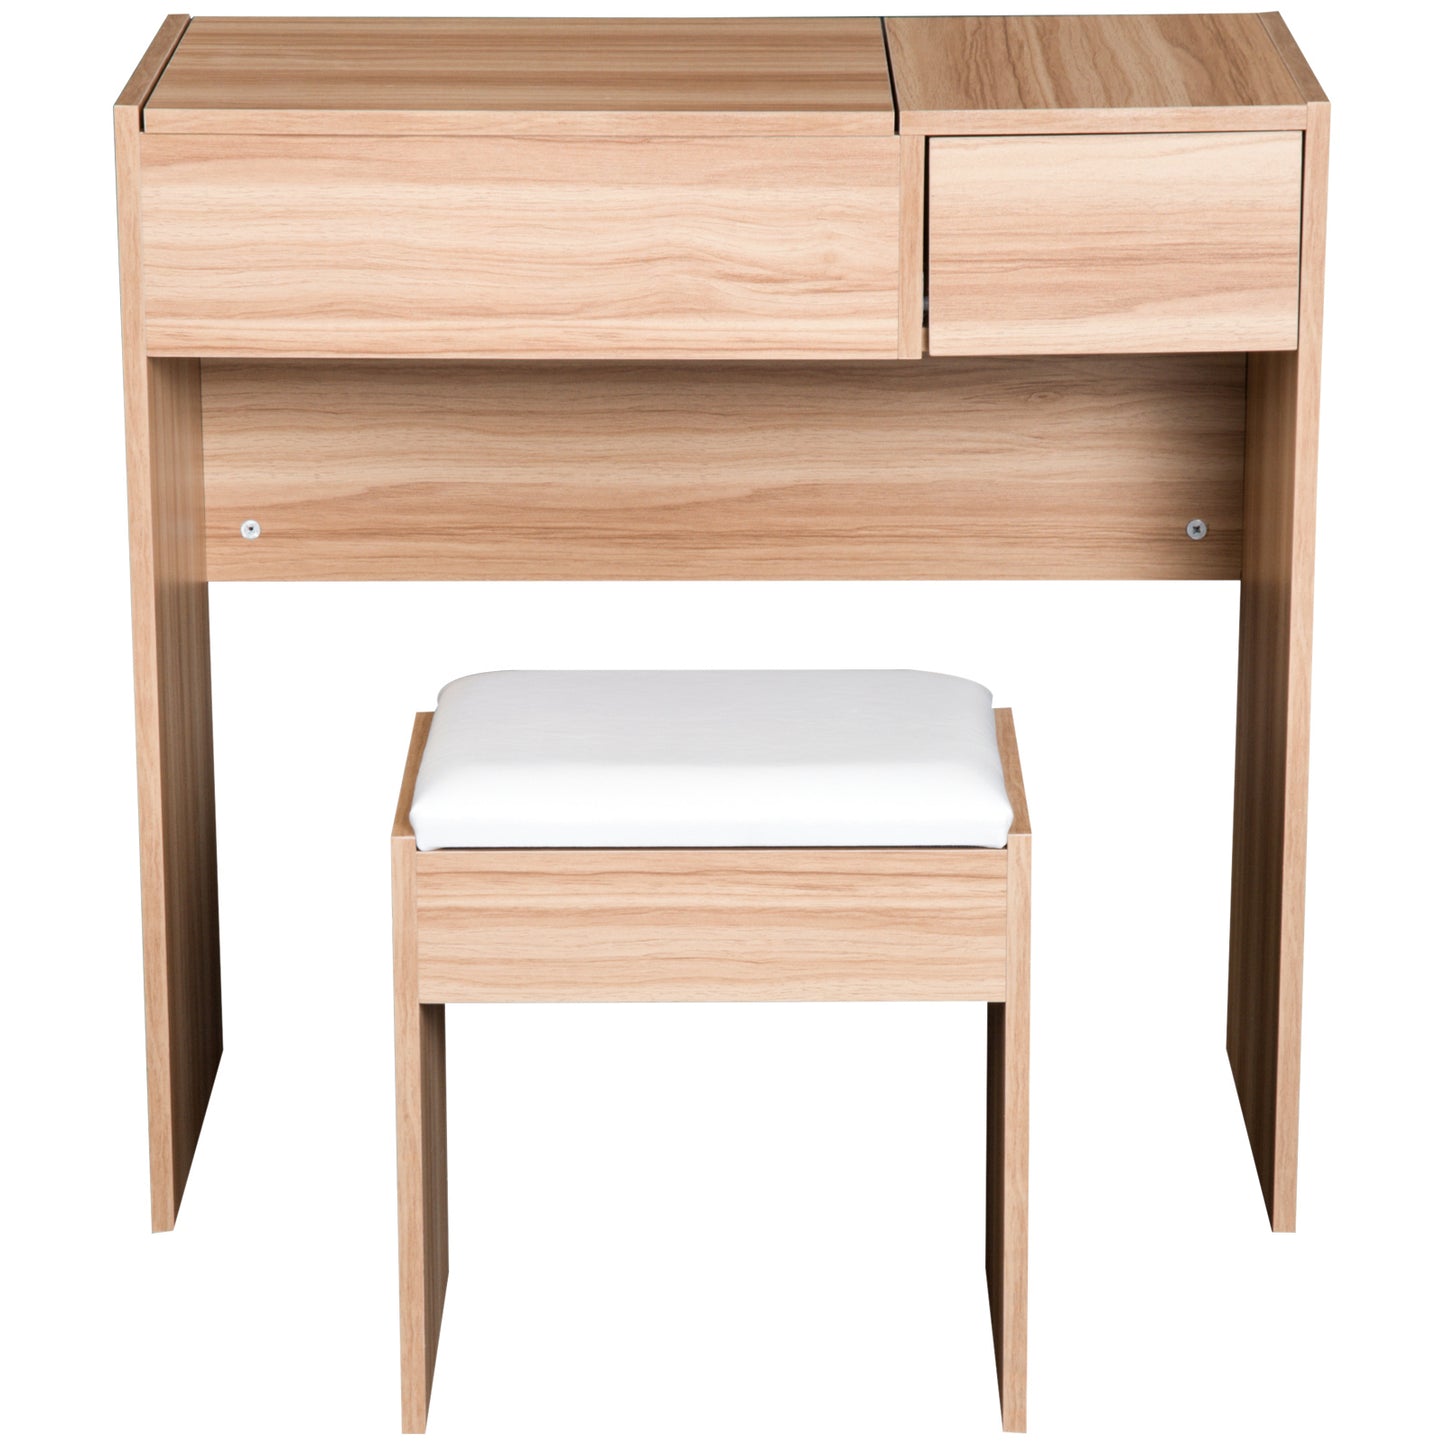 HOMCOM Dressing Table With Mirror and Stool-Wood Grain Colour